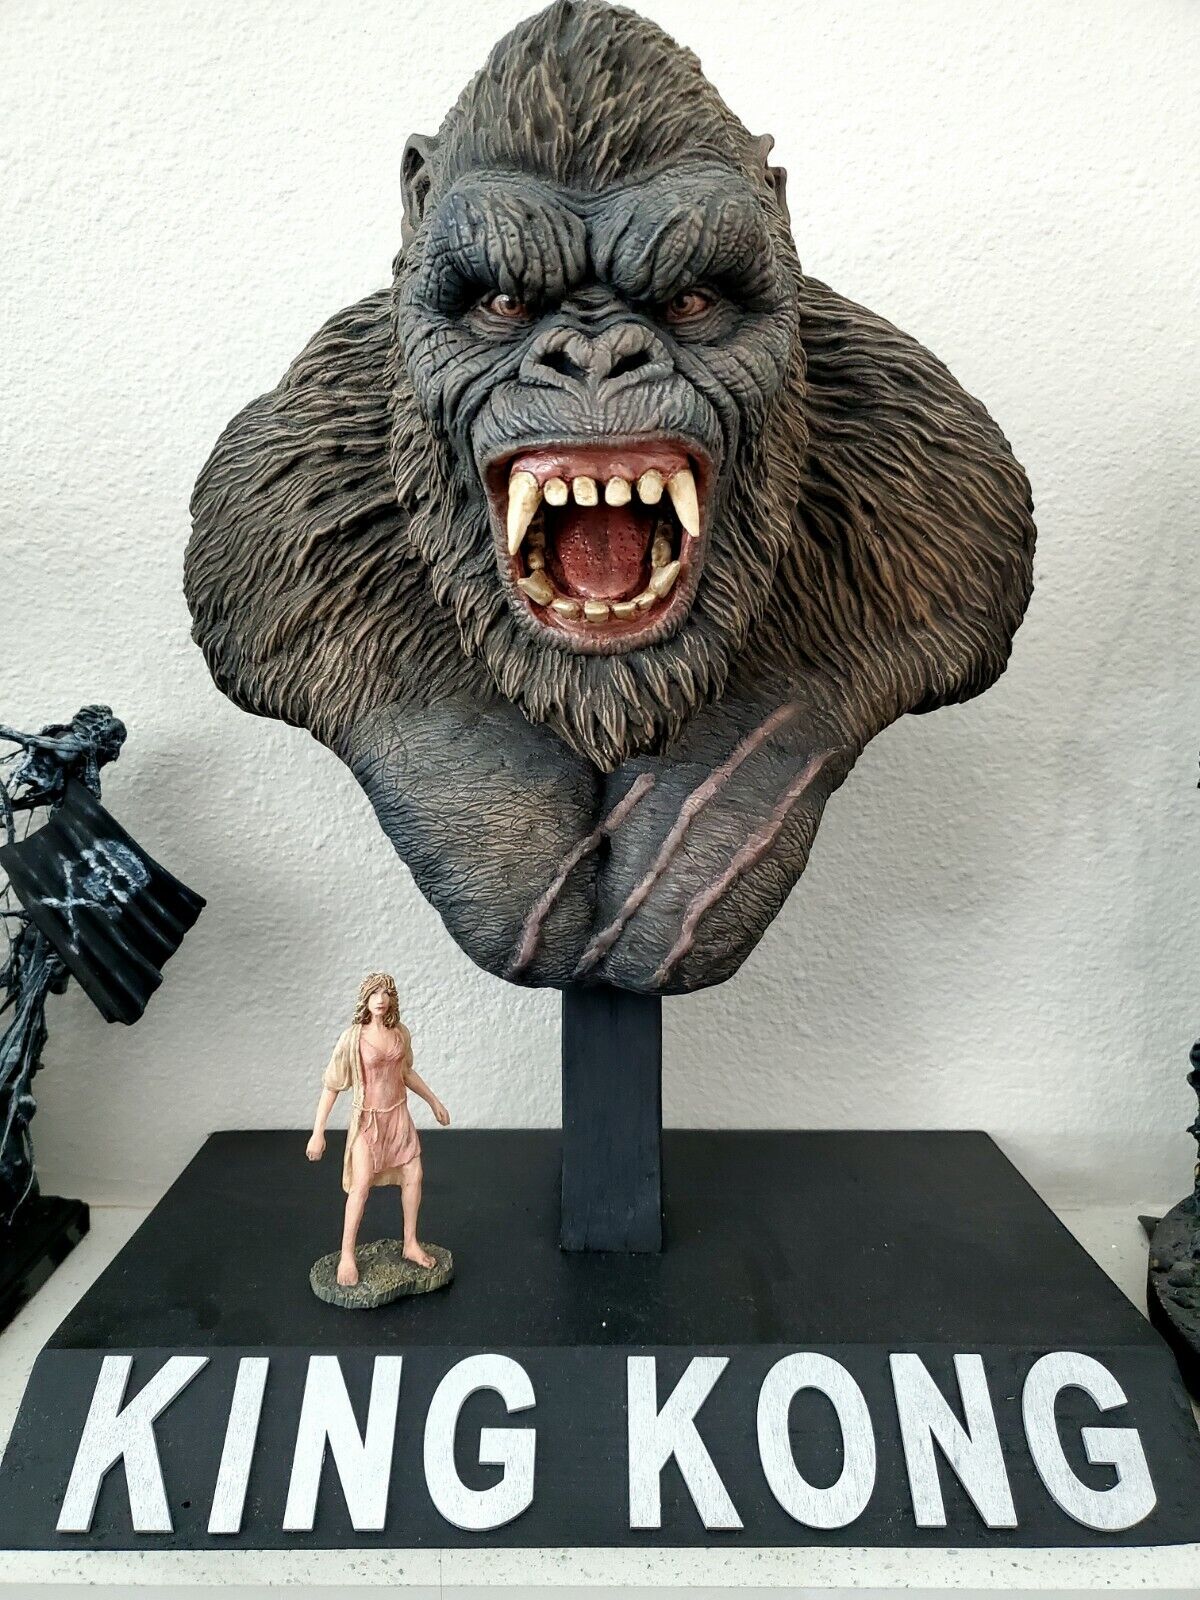 KING KONG MAQUETTE STATUE BUST CUSTOM -LEGENDARY SCALE 18" RARE + SIDESHOW BOOK